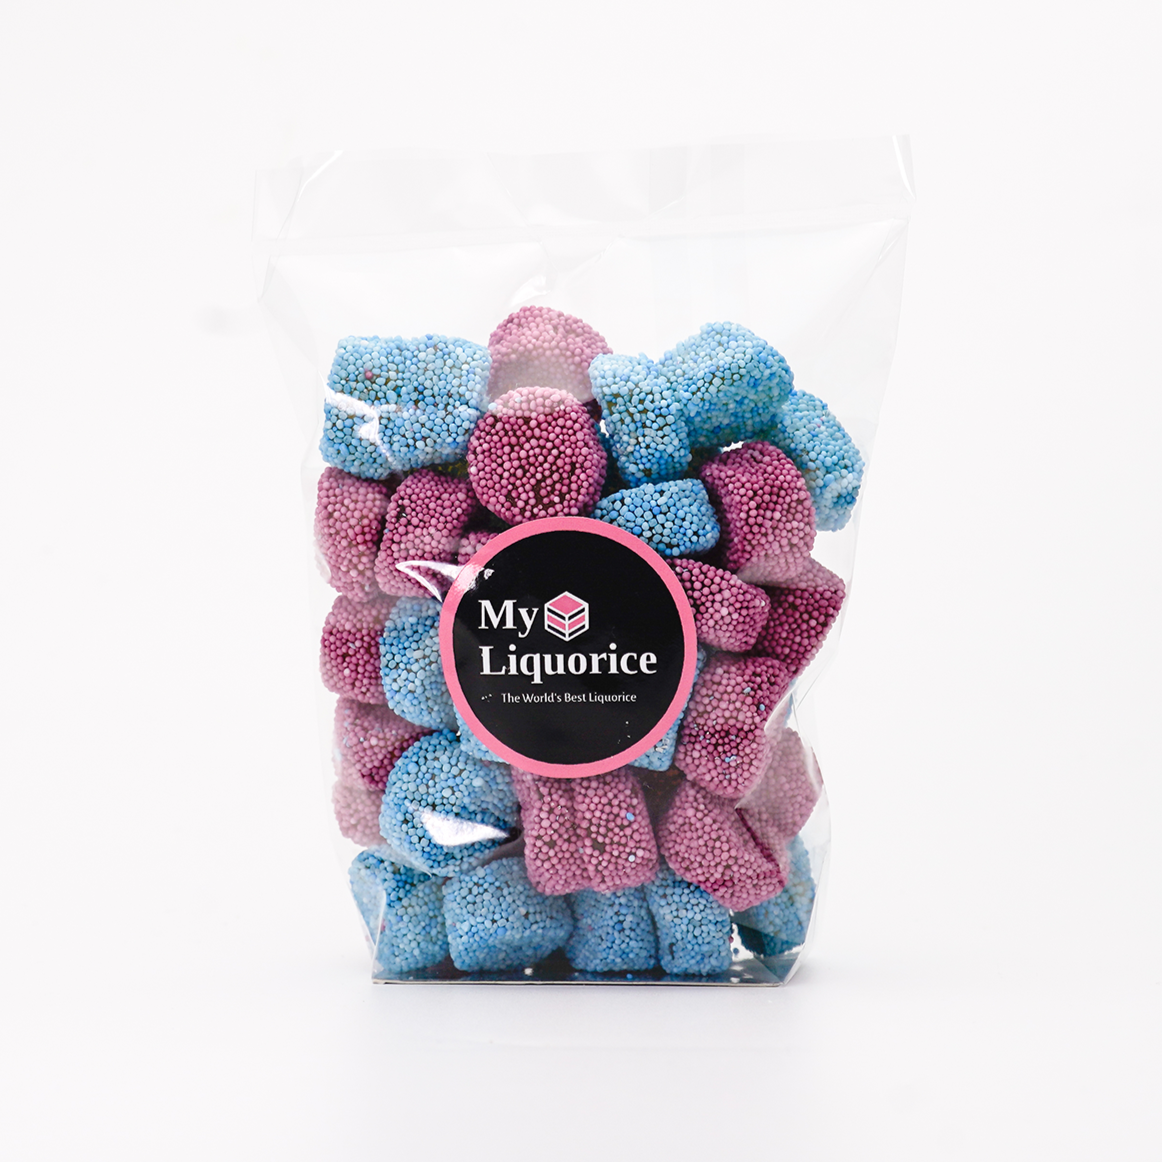 Jelly Spogs - soft liquorice jelly sweets covered in pink and blue sprinkles